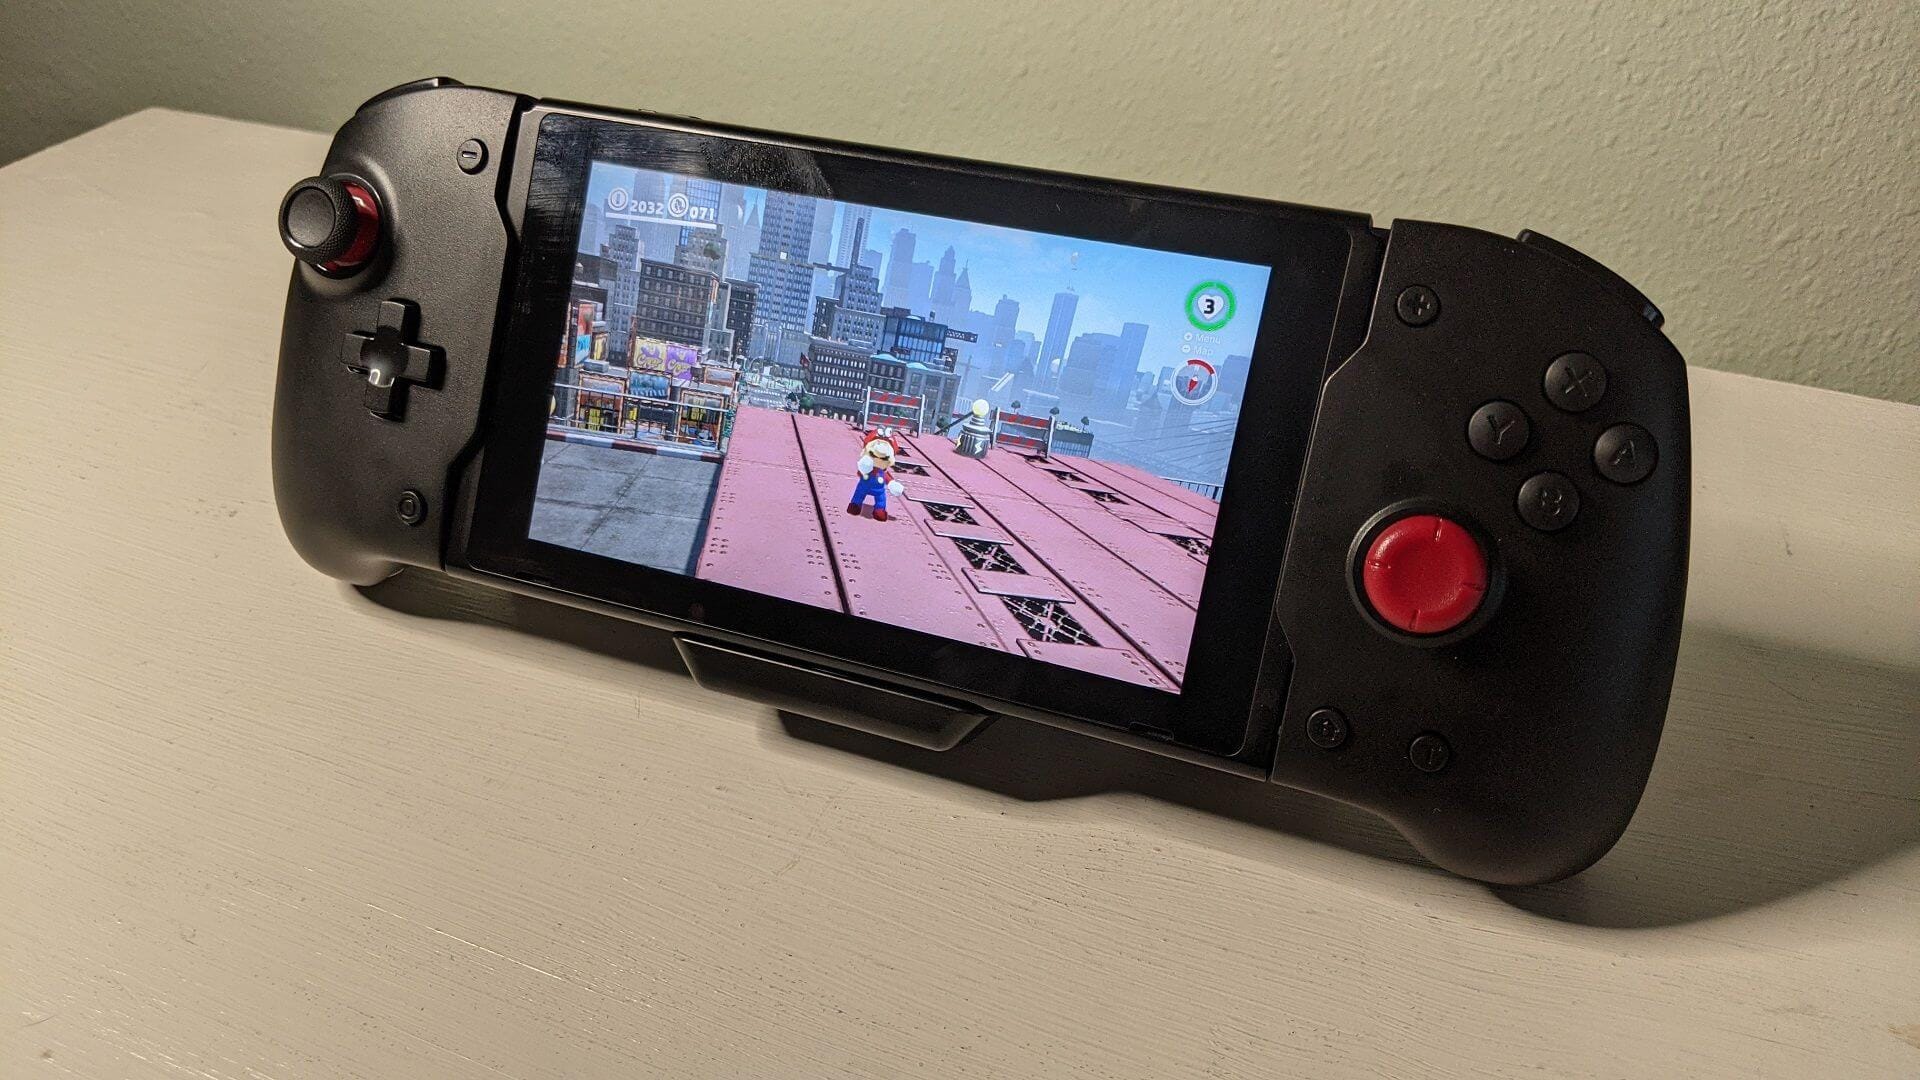 OIVO Switch Handheld Grip Controller Preview Image